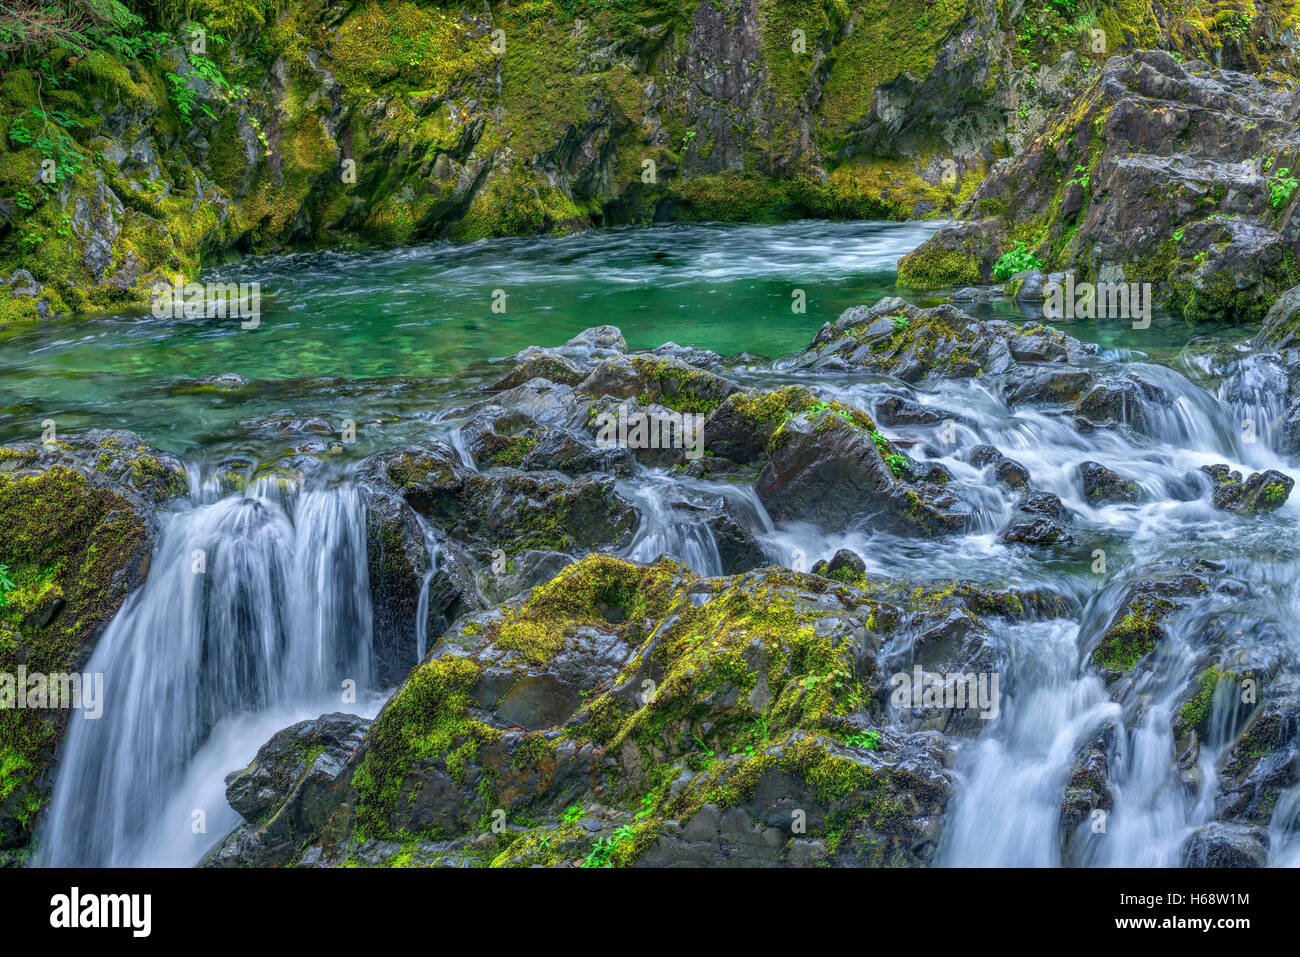 USA, Oregon, Willamette National Forest, Opal Creek Scenic Recreation Area, Multiple small falls and swift flow of Opal Creek. Stock Photo